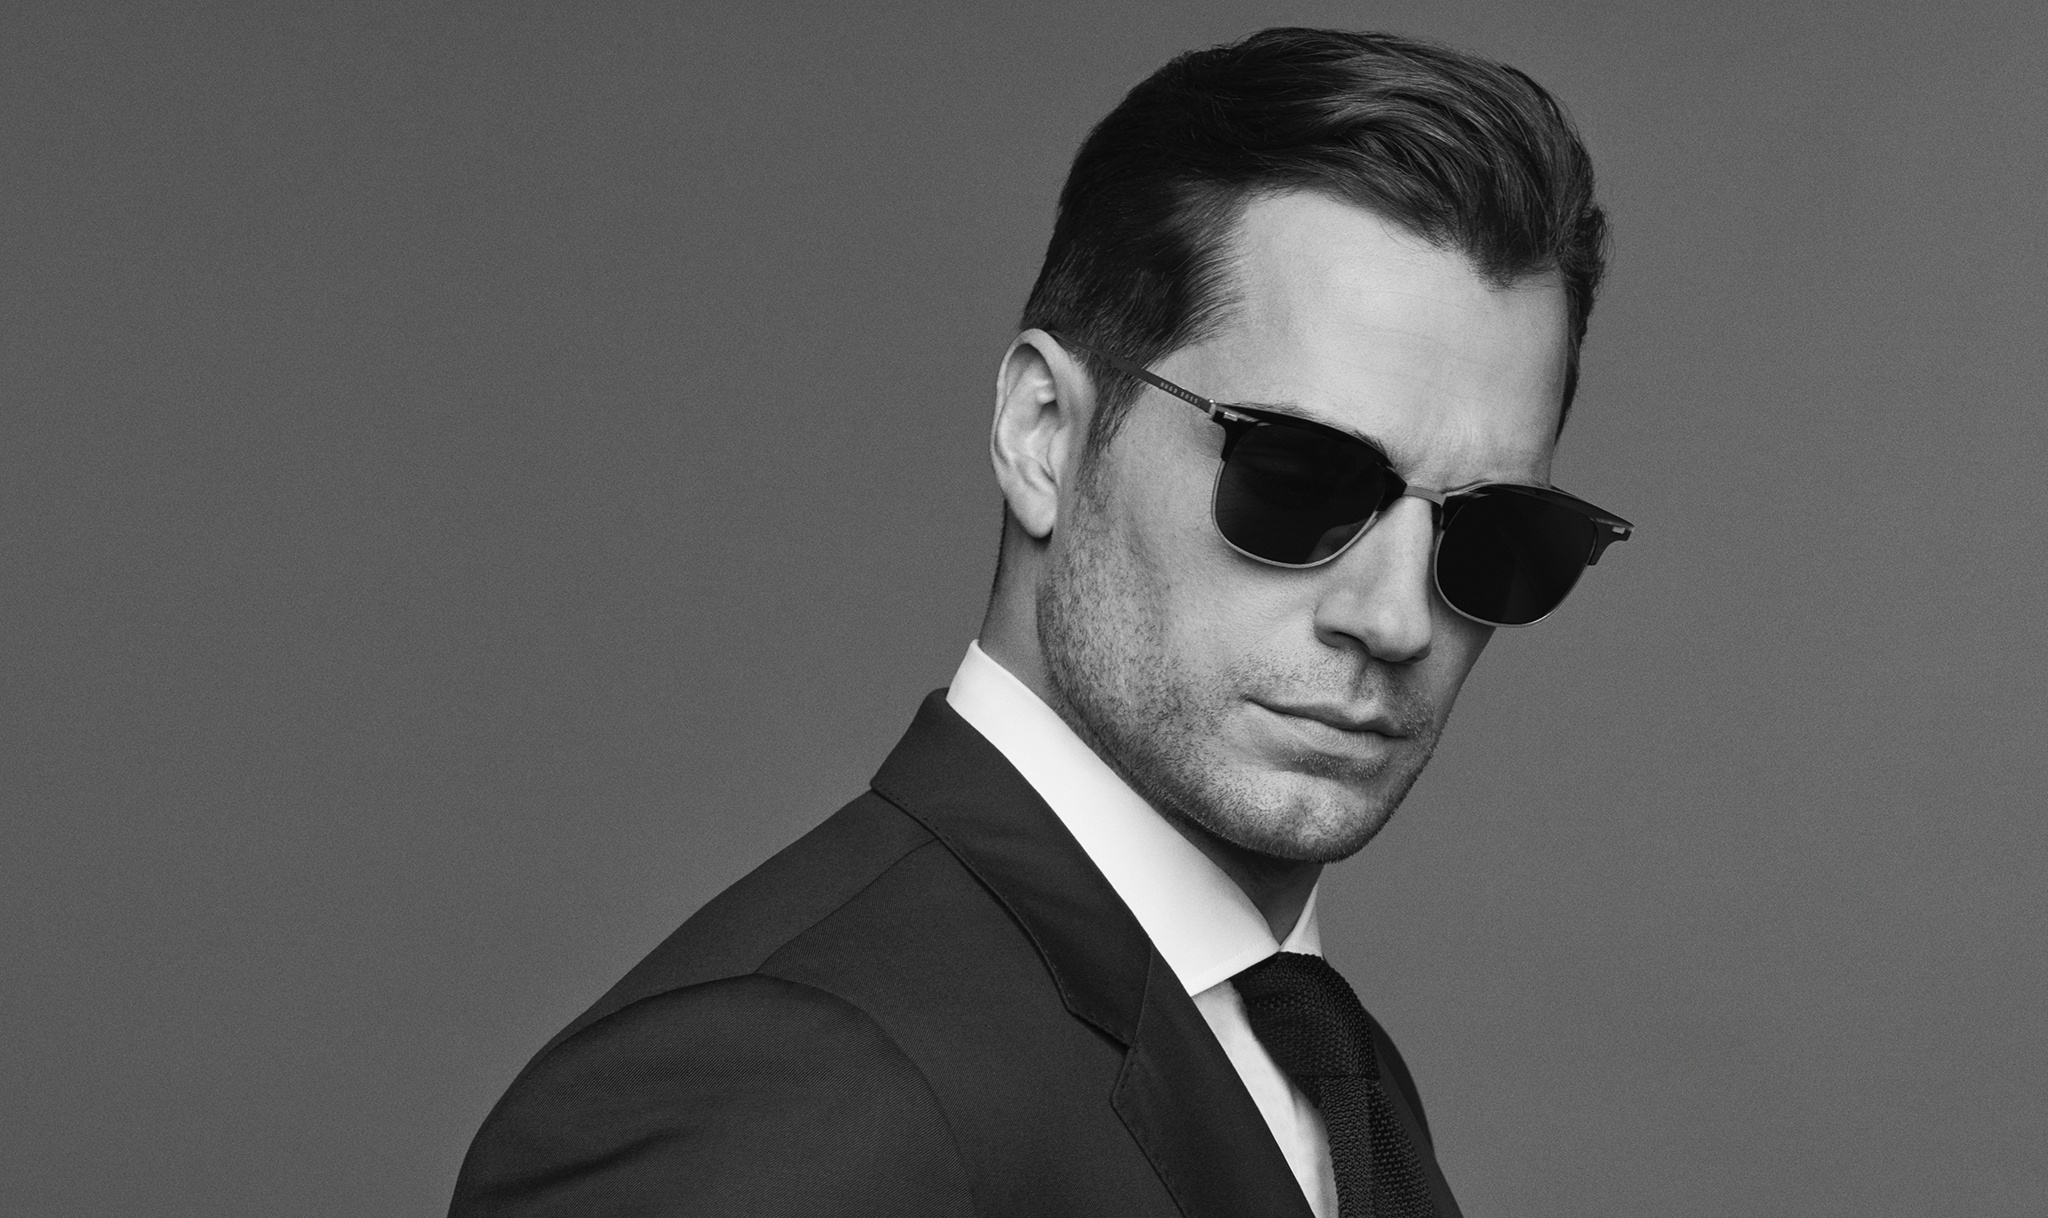 Free photo Henry Cavill in a tuxedo and sunglasses.